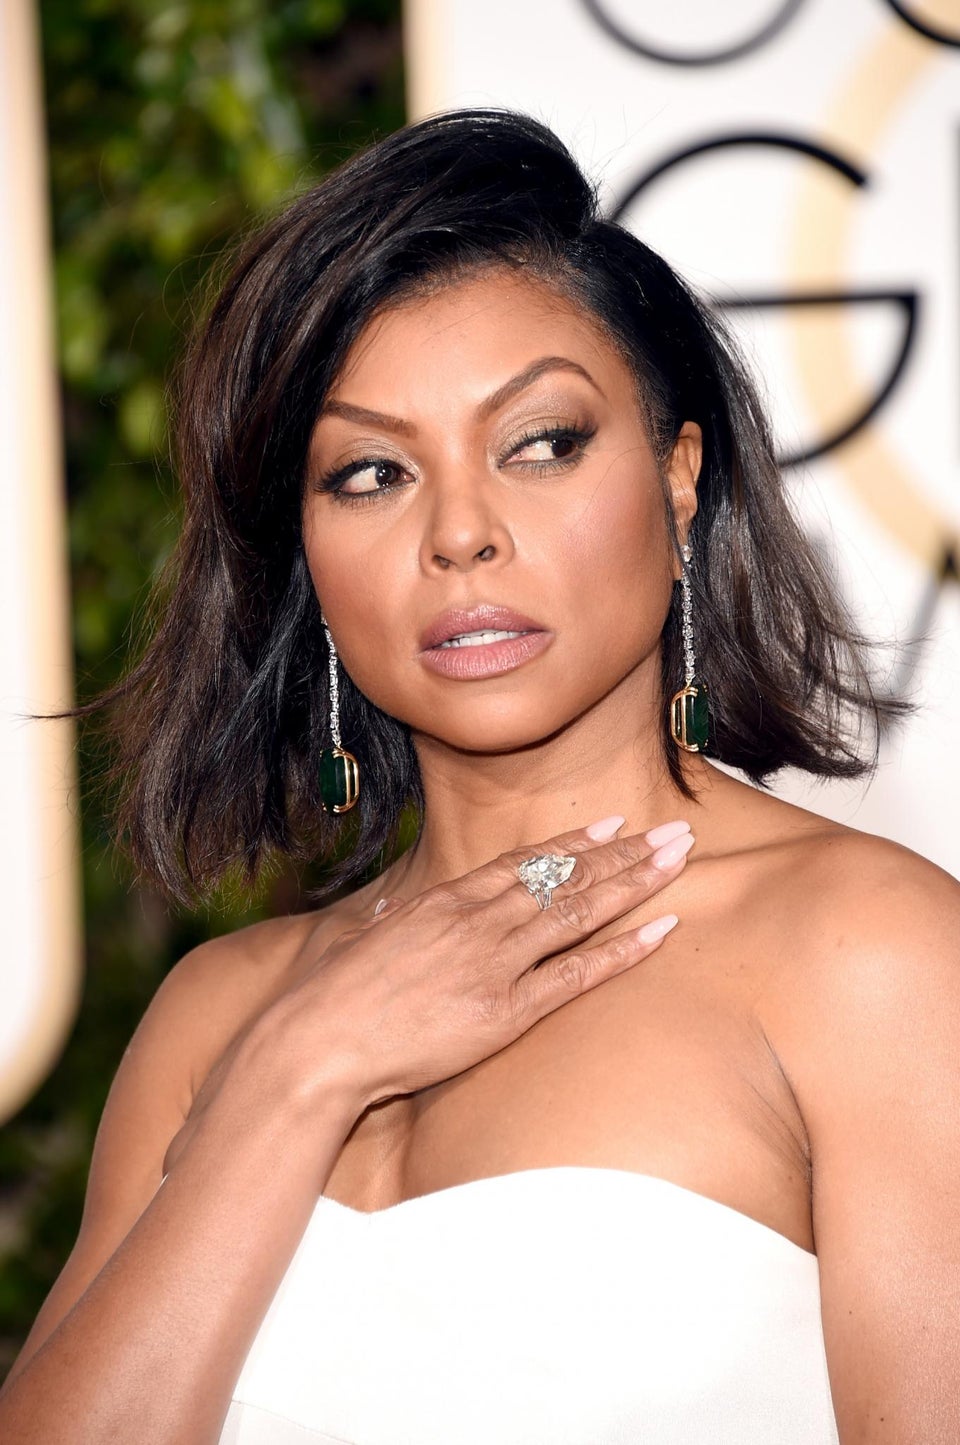 Oops! Taraji P. Henson Mistakes Coldplay for Maroon 5 During Super Bowl Halftime Show and We All LOL